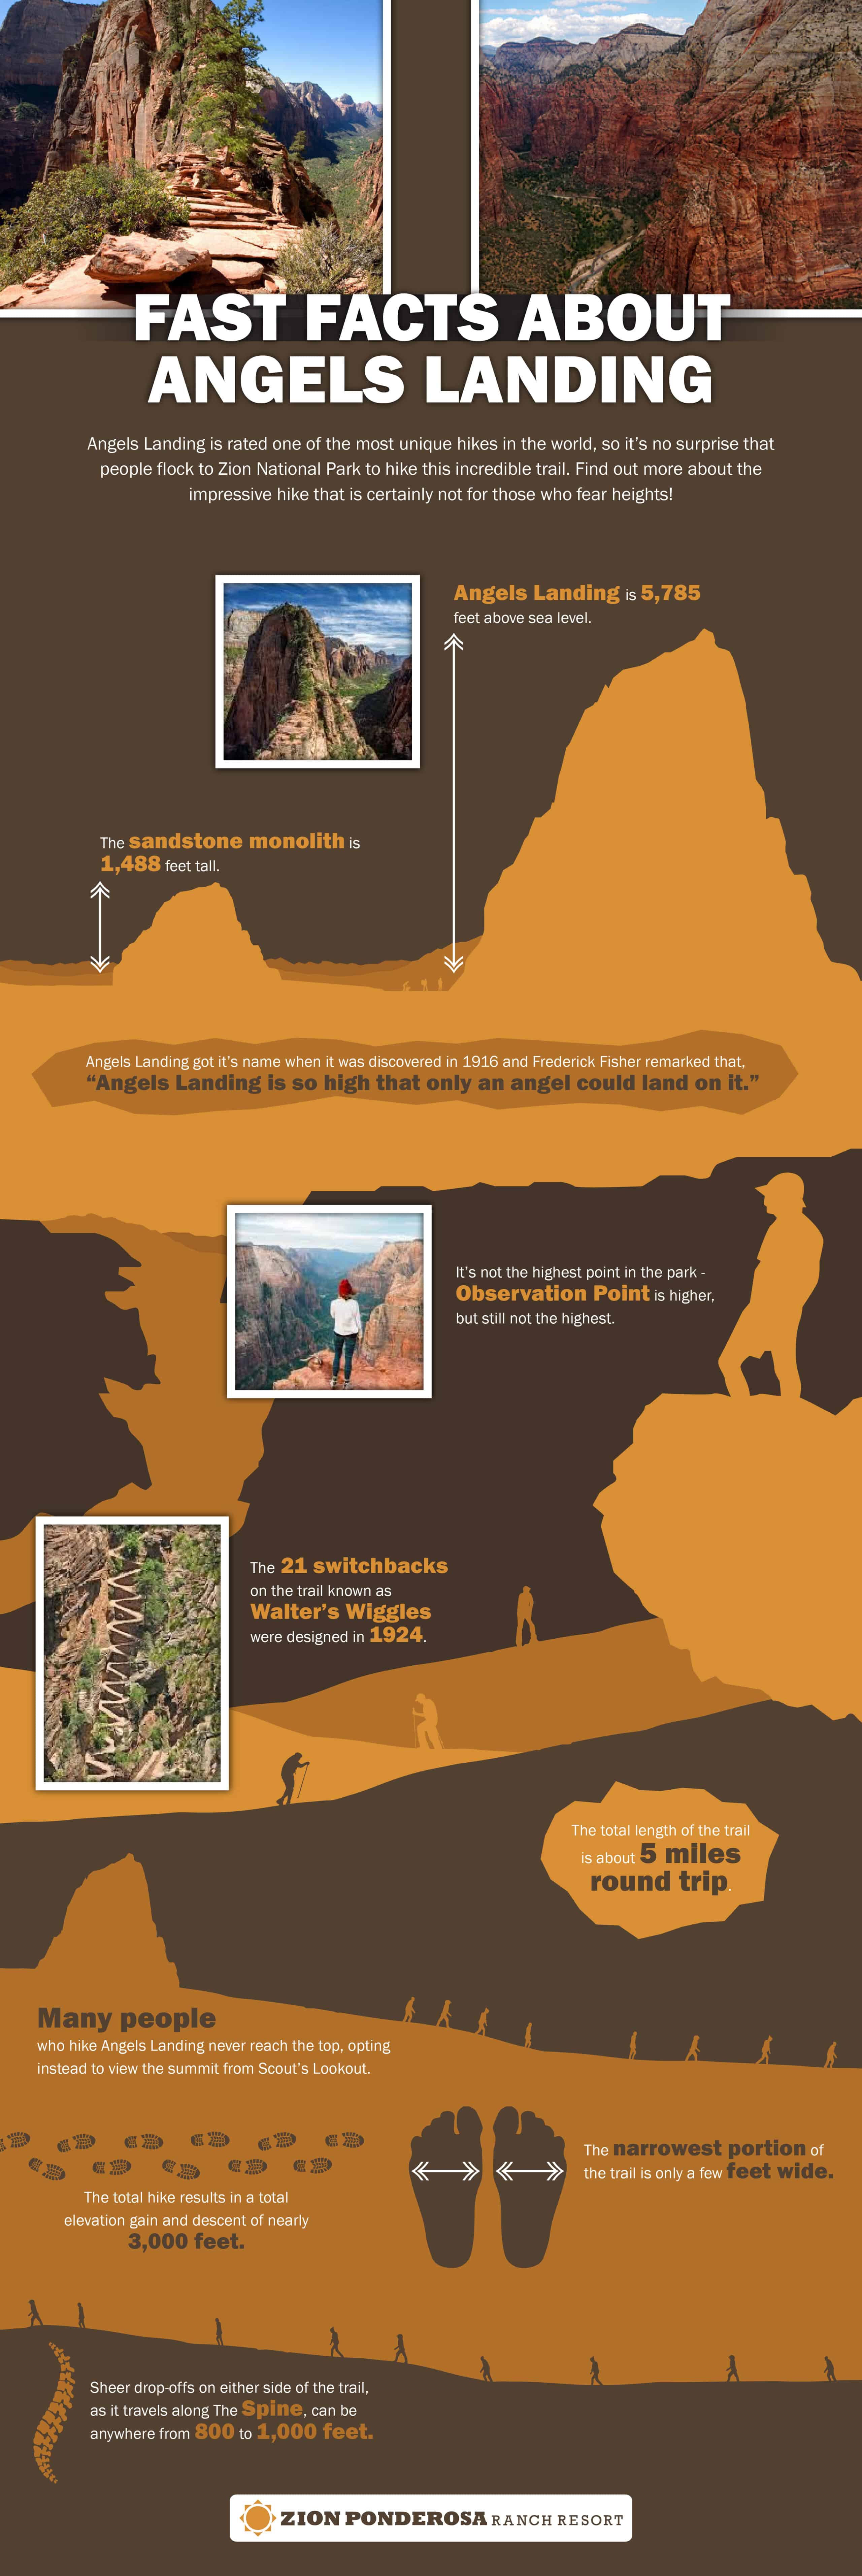 Infographic on Angels Landing Hike in Zion National Park